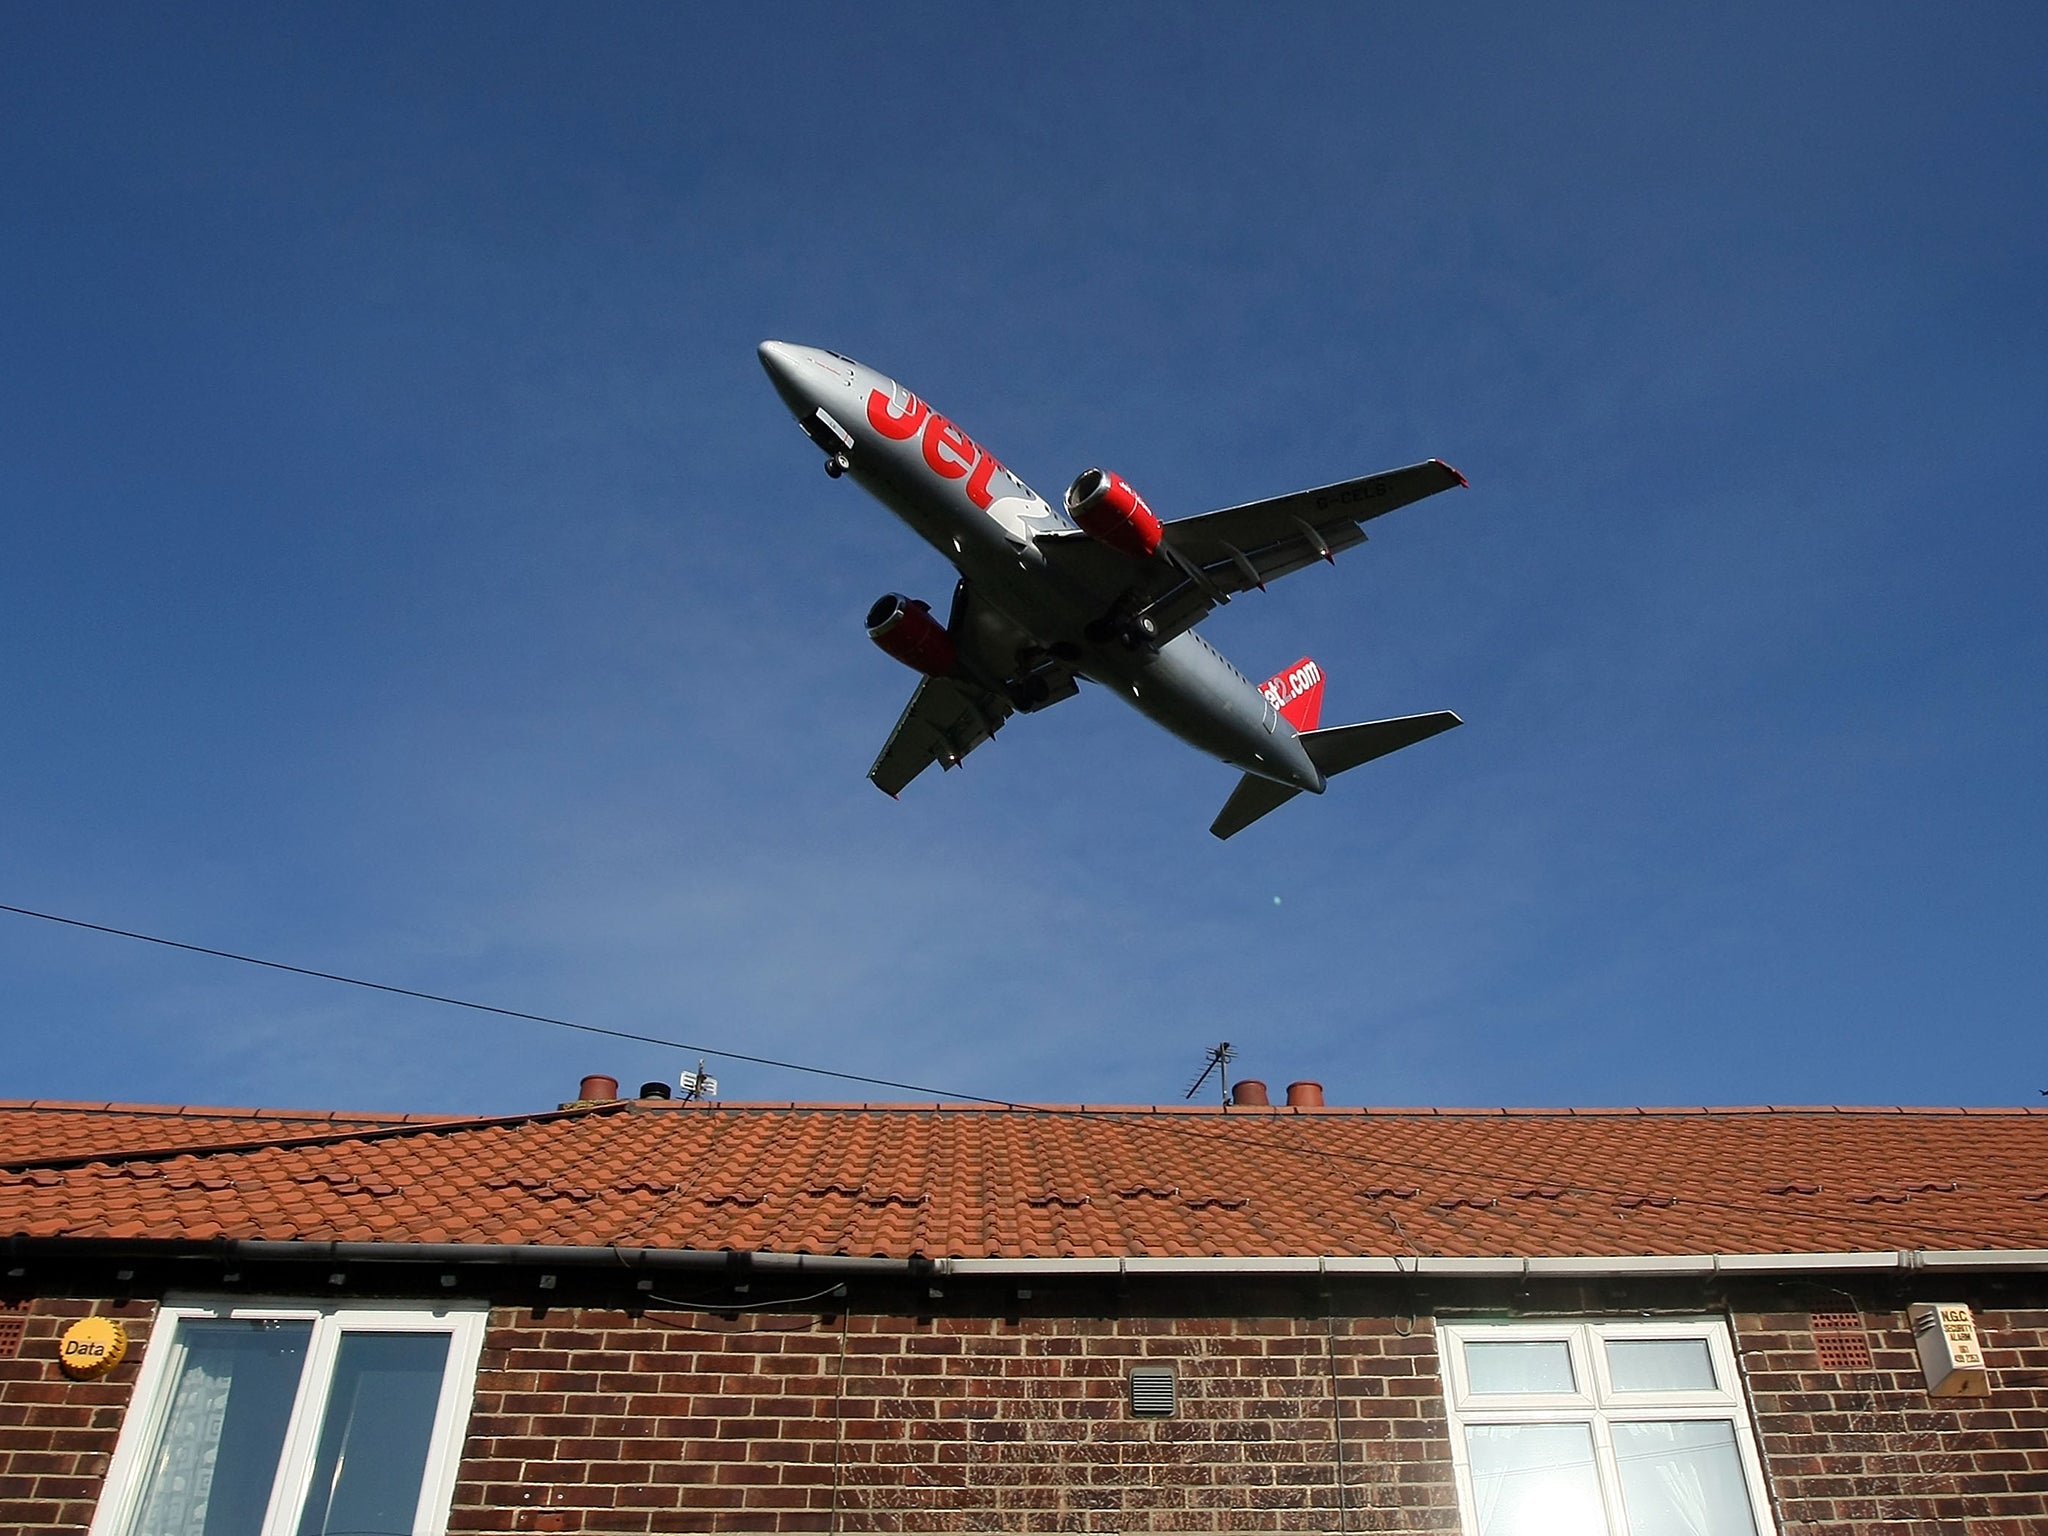 One passenger successfully claimed compensation from Jet2 after a 27-hour mechanical delay